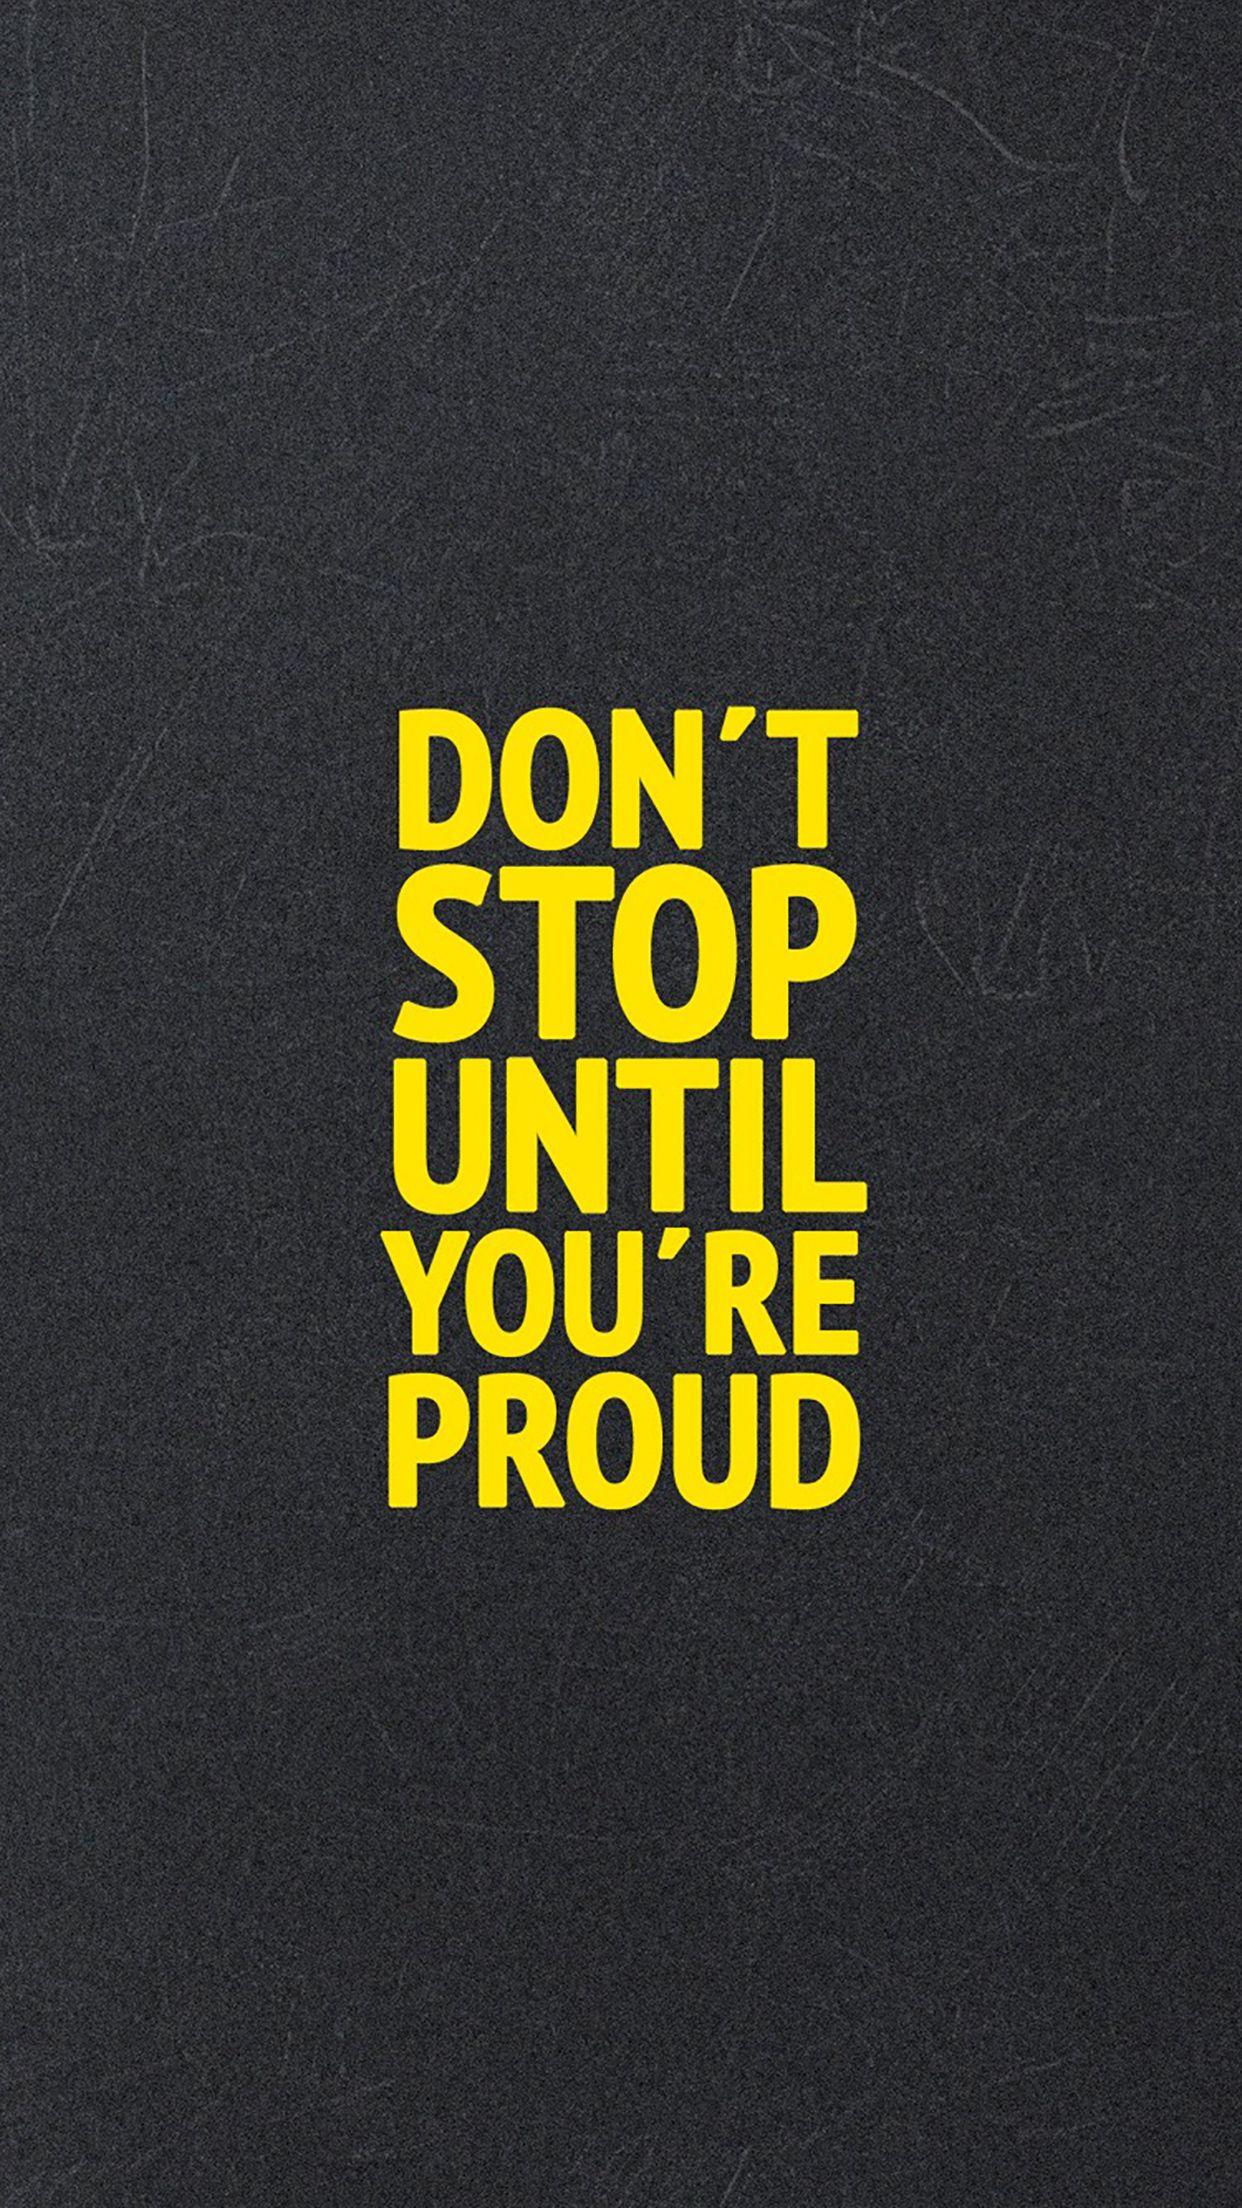 Advices, Don't Stop Until You Are Proud Wallpaper for iPhone X, 8